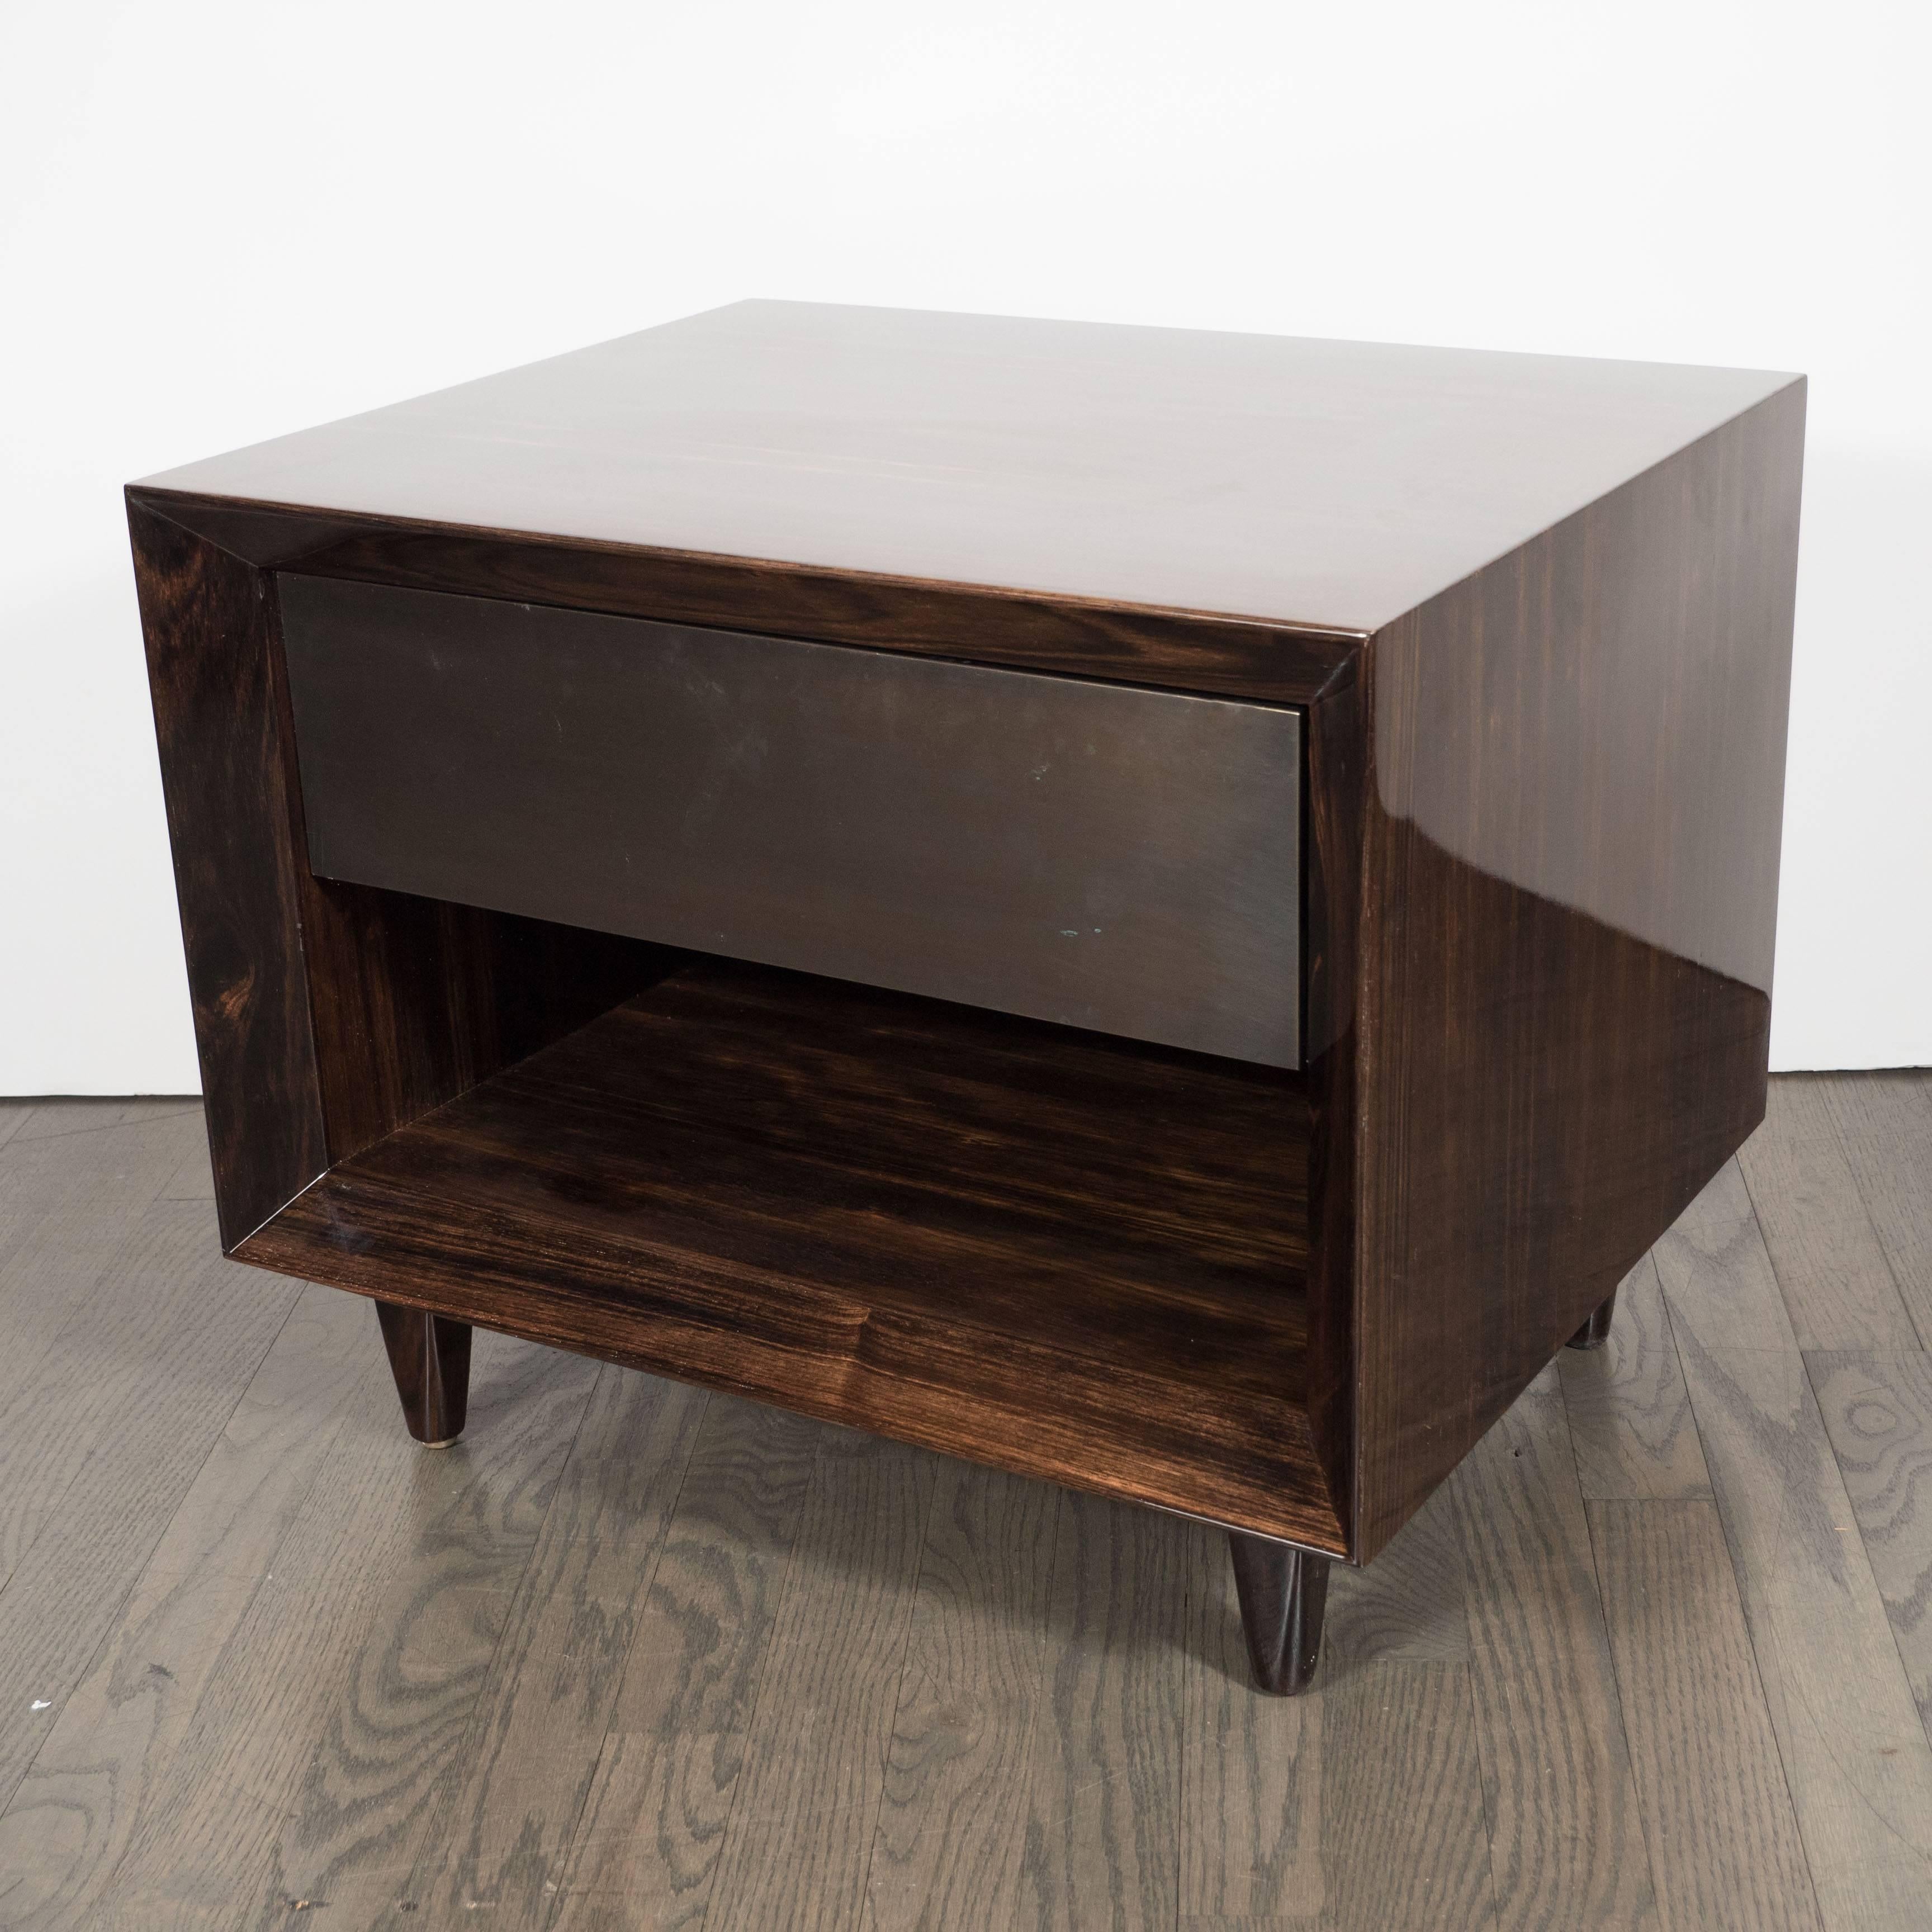 Pair of Modernist Macassar Nightstands / End Tables with Bronze Paneled Drawers In Excellent Condition For Sale In New York, NY